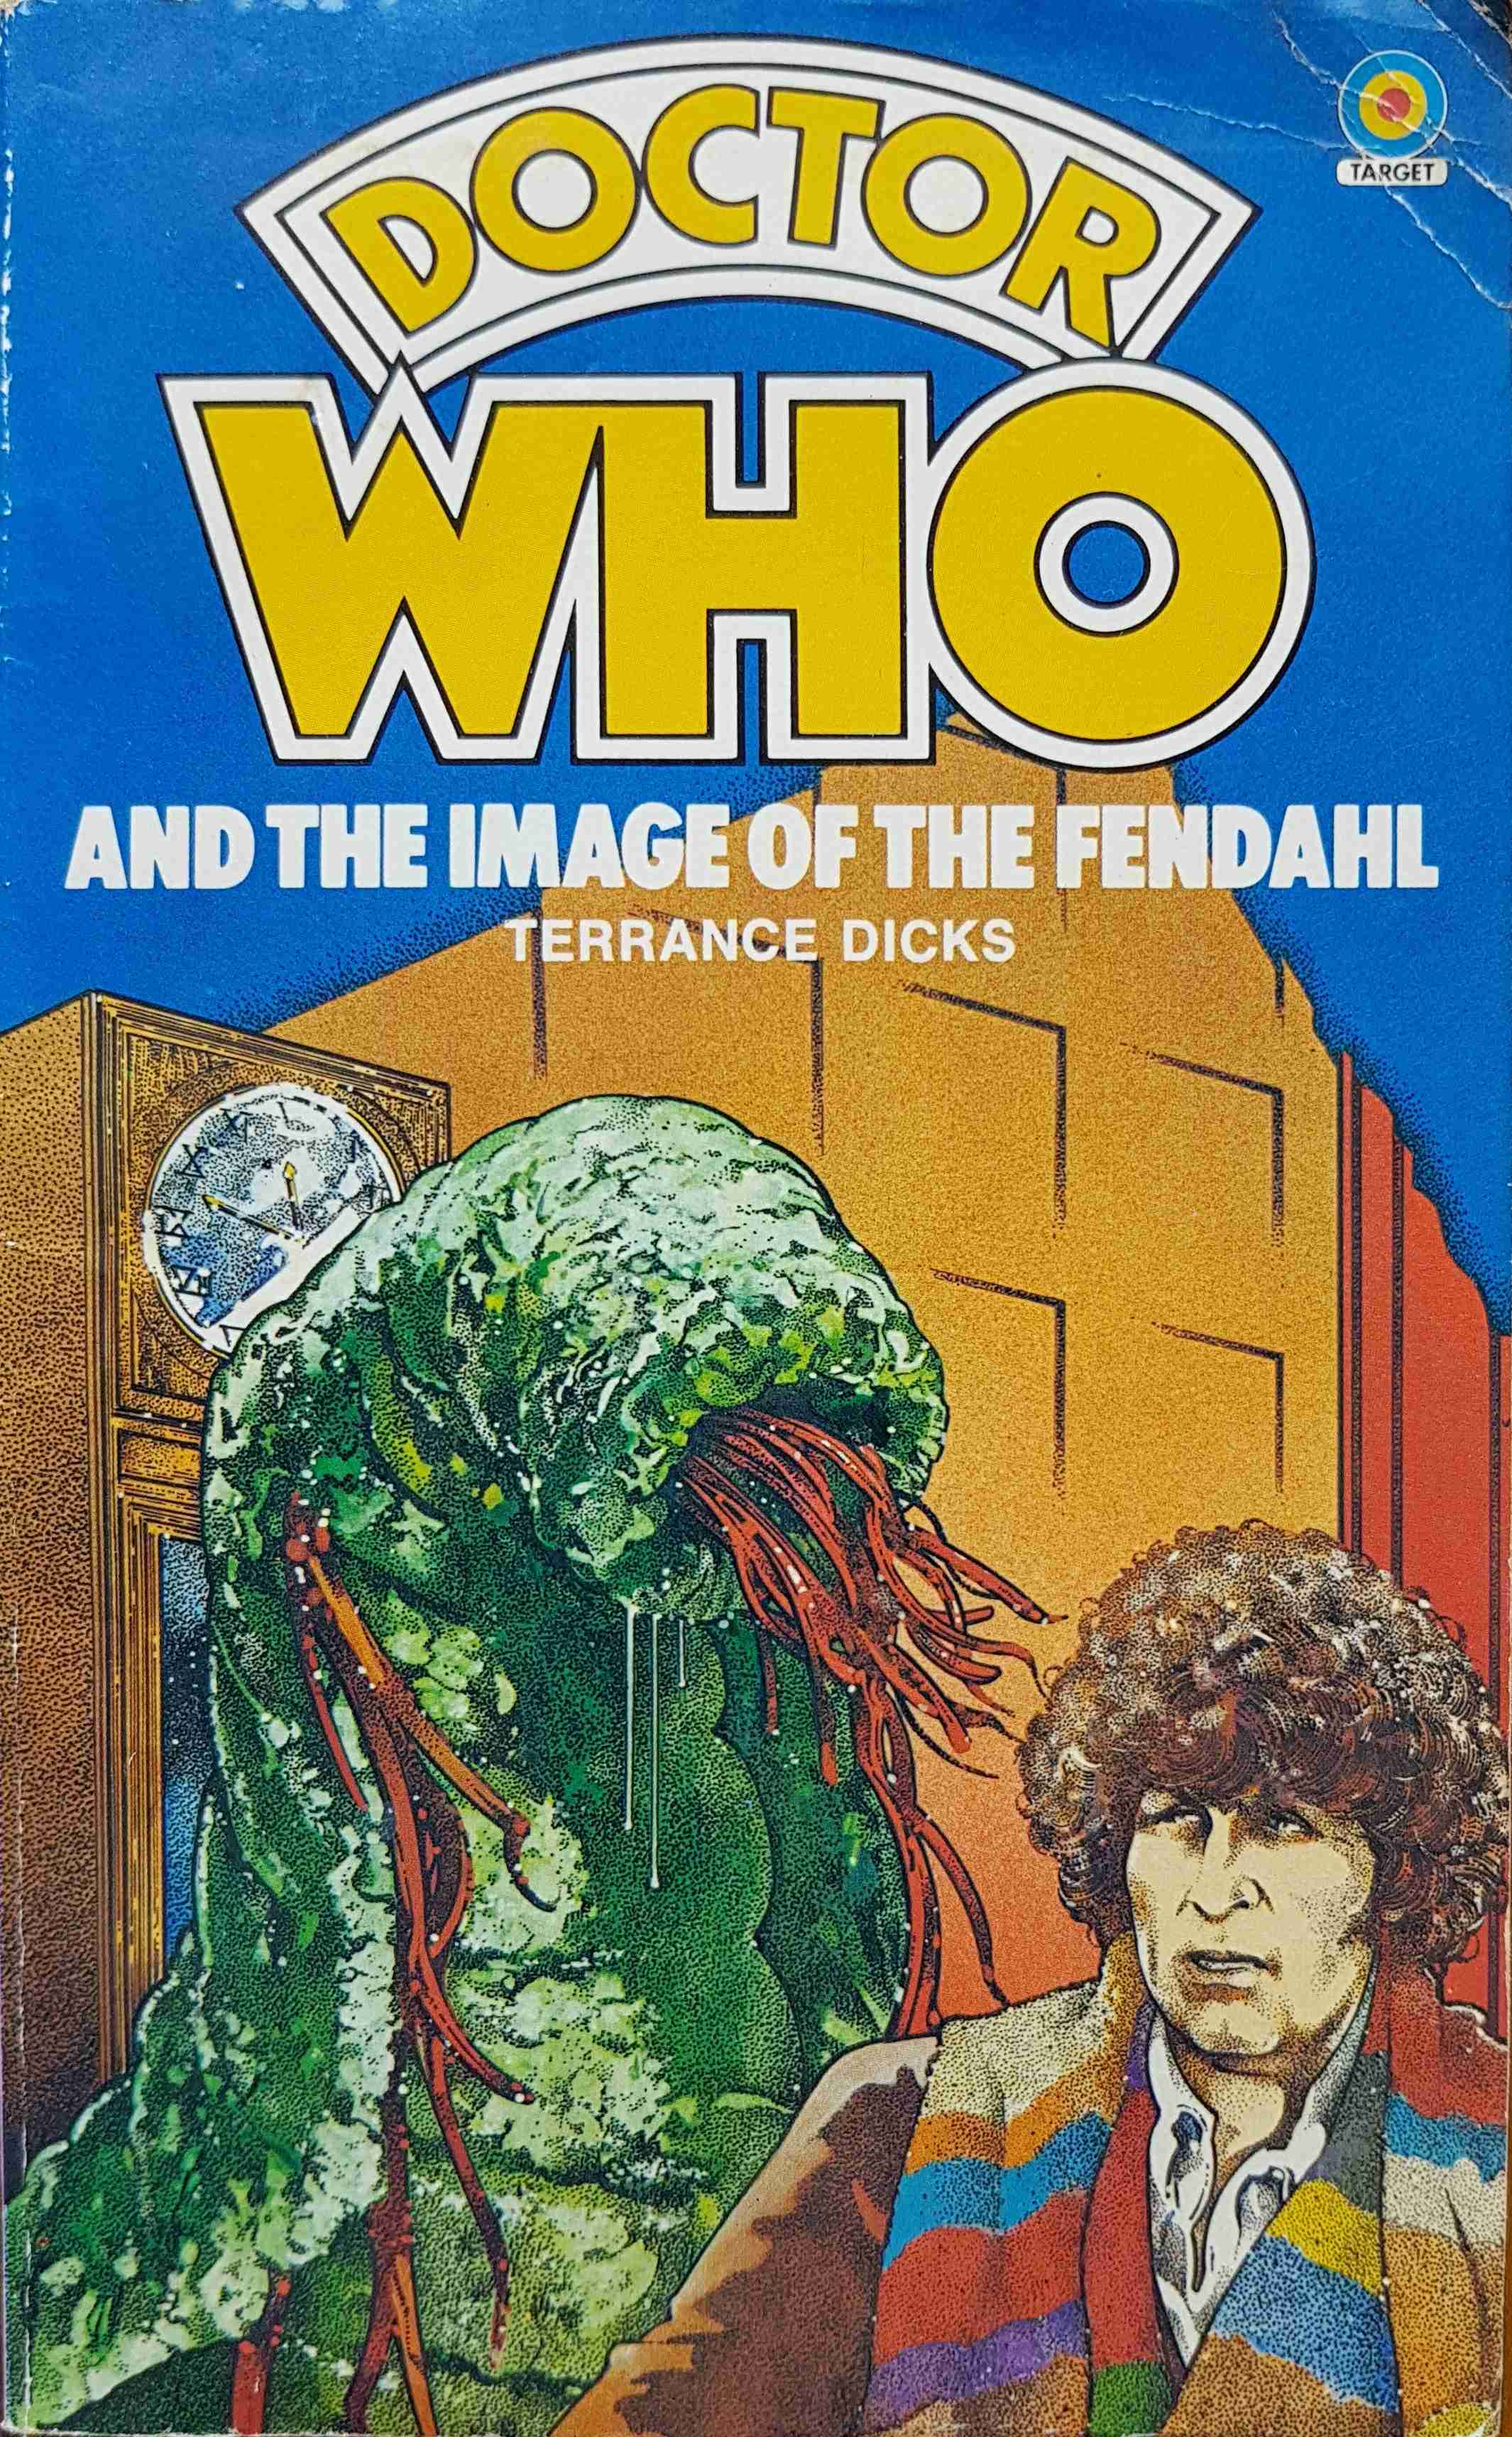 Picture of 0-426-20077-2 Doctor Who - Image of the Fendahl by artist Terrance Dicks from the BBC books - Records and Tapes library